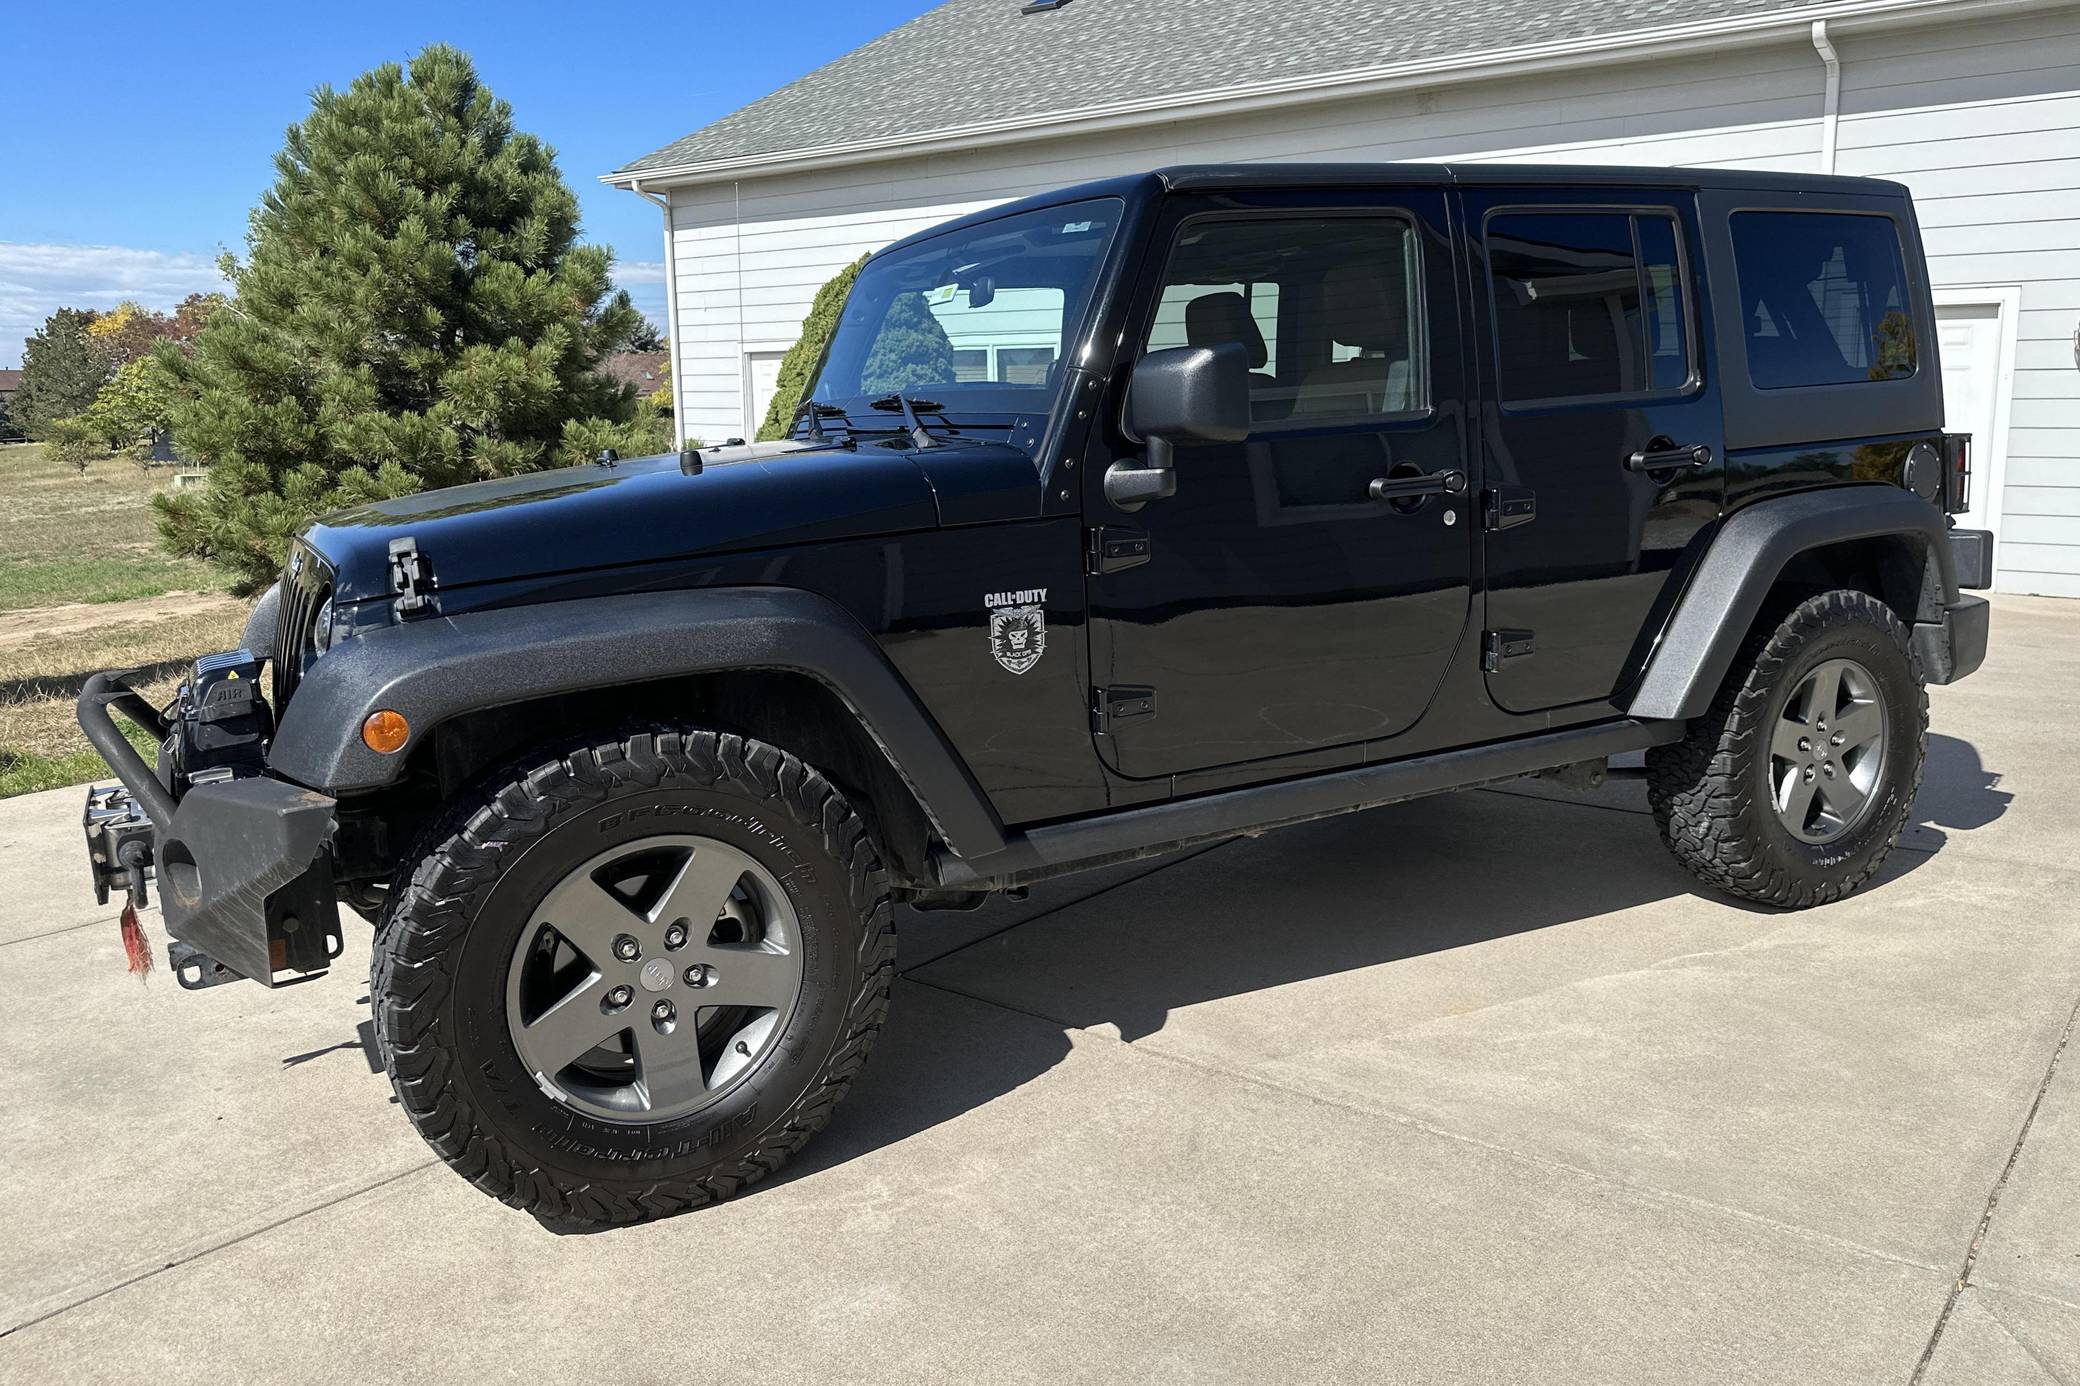 2011 Jeep Wrangler Rubicon Unlimited Black Ops 4x4 for Sale - Cars & Bids